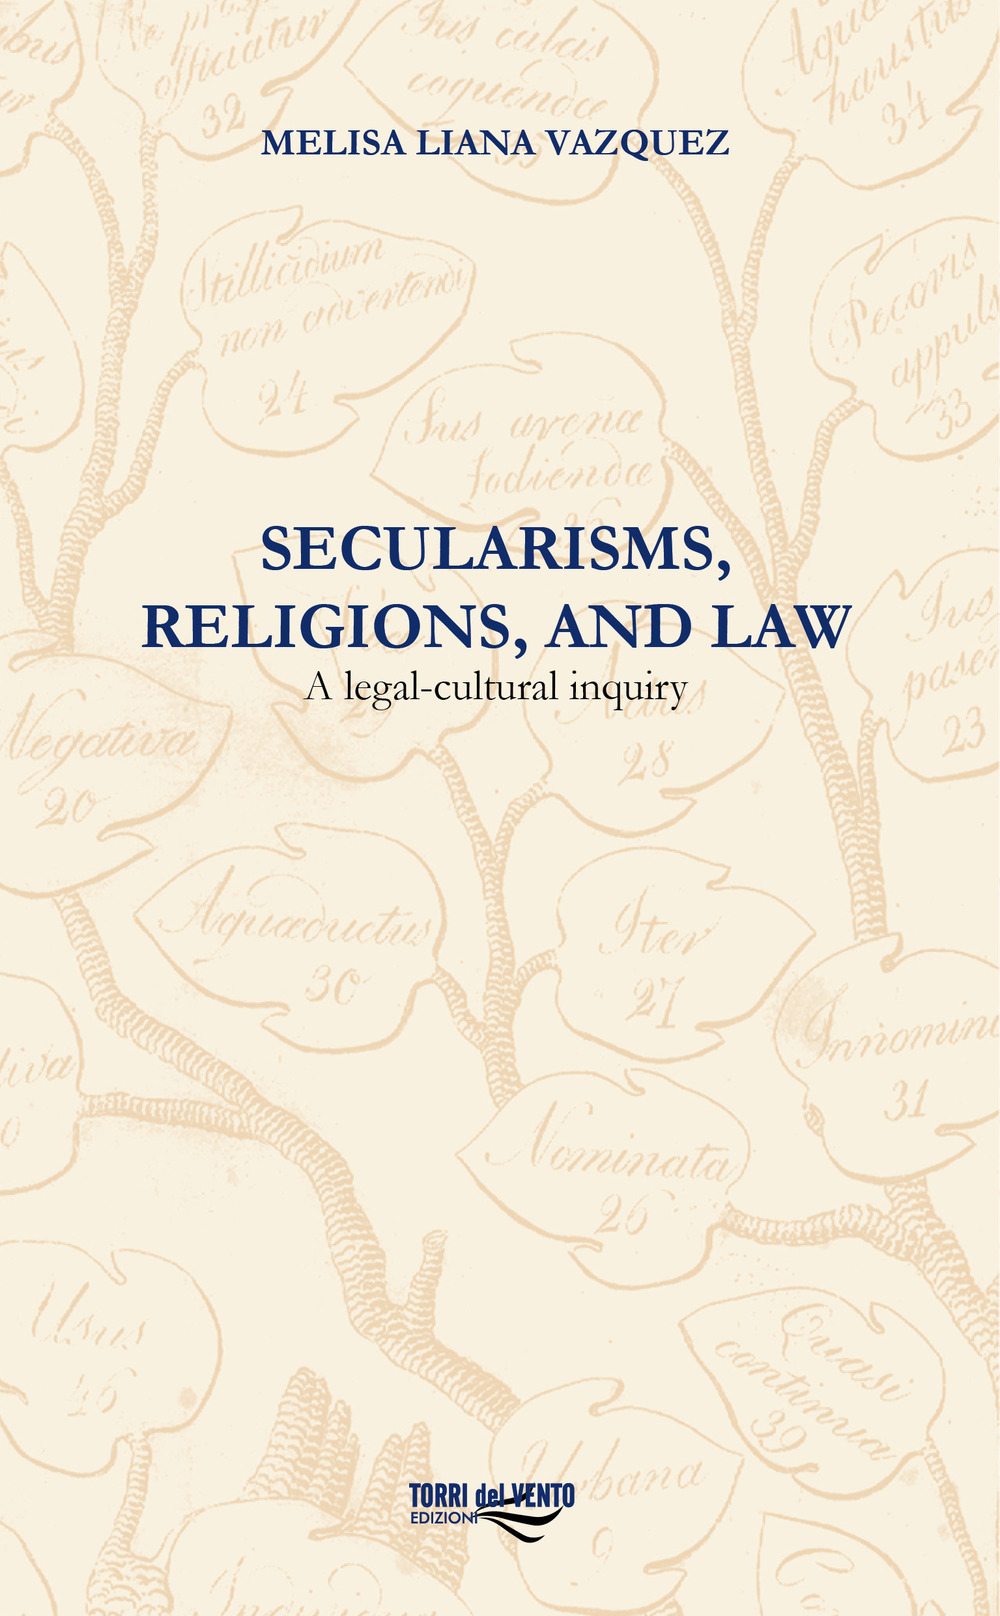 Secularisms, religions, and law. A legal-cultural inquiry